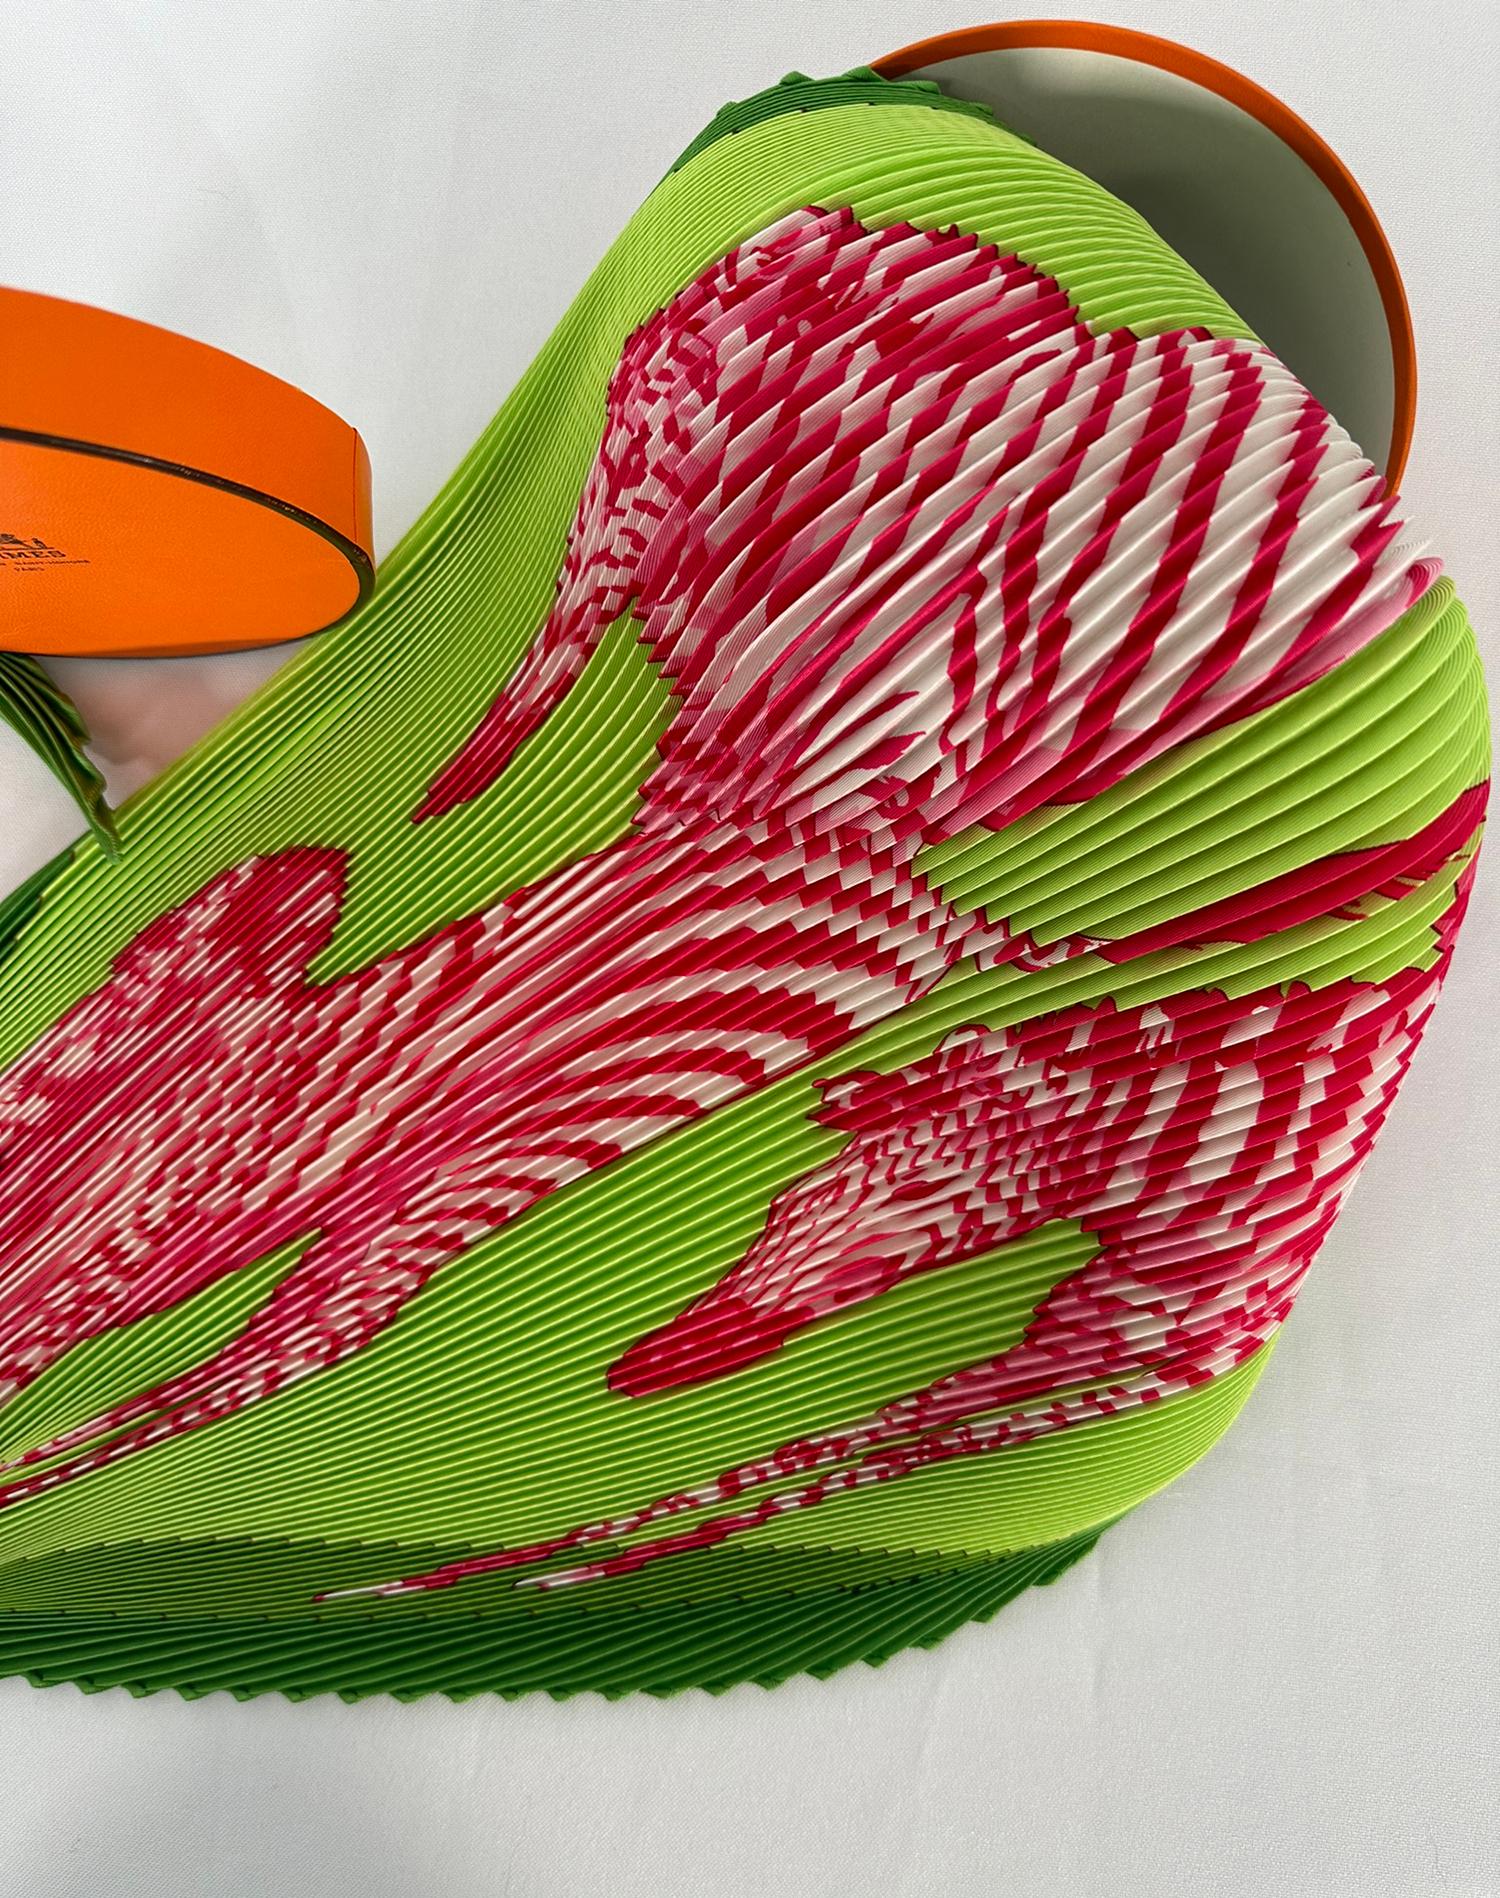 Hermes discontinued plisse scarves in 2012. This most-coveted, Hermès Les Zebres II, silk twill plisse scarf features leaping zebras in brilliant pink and white against a lush lime green background, all set off by a rich grass green border. Designed